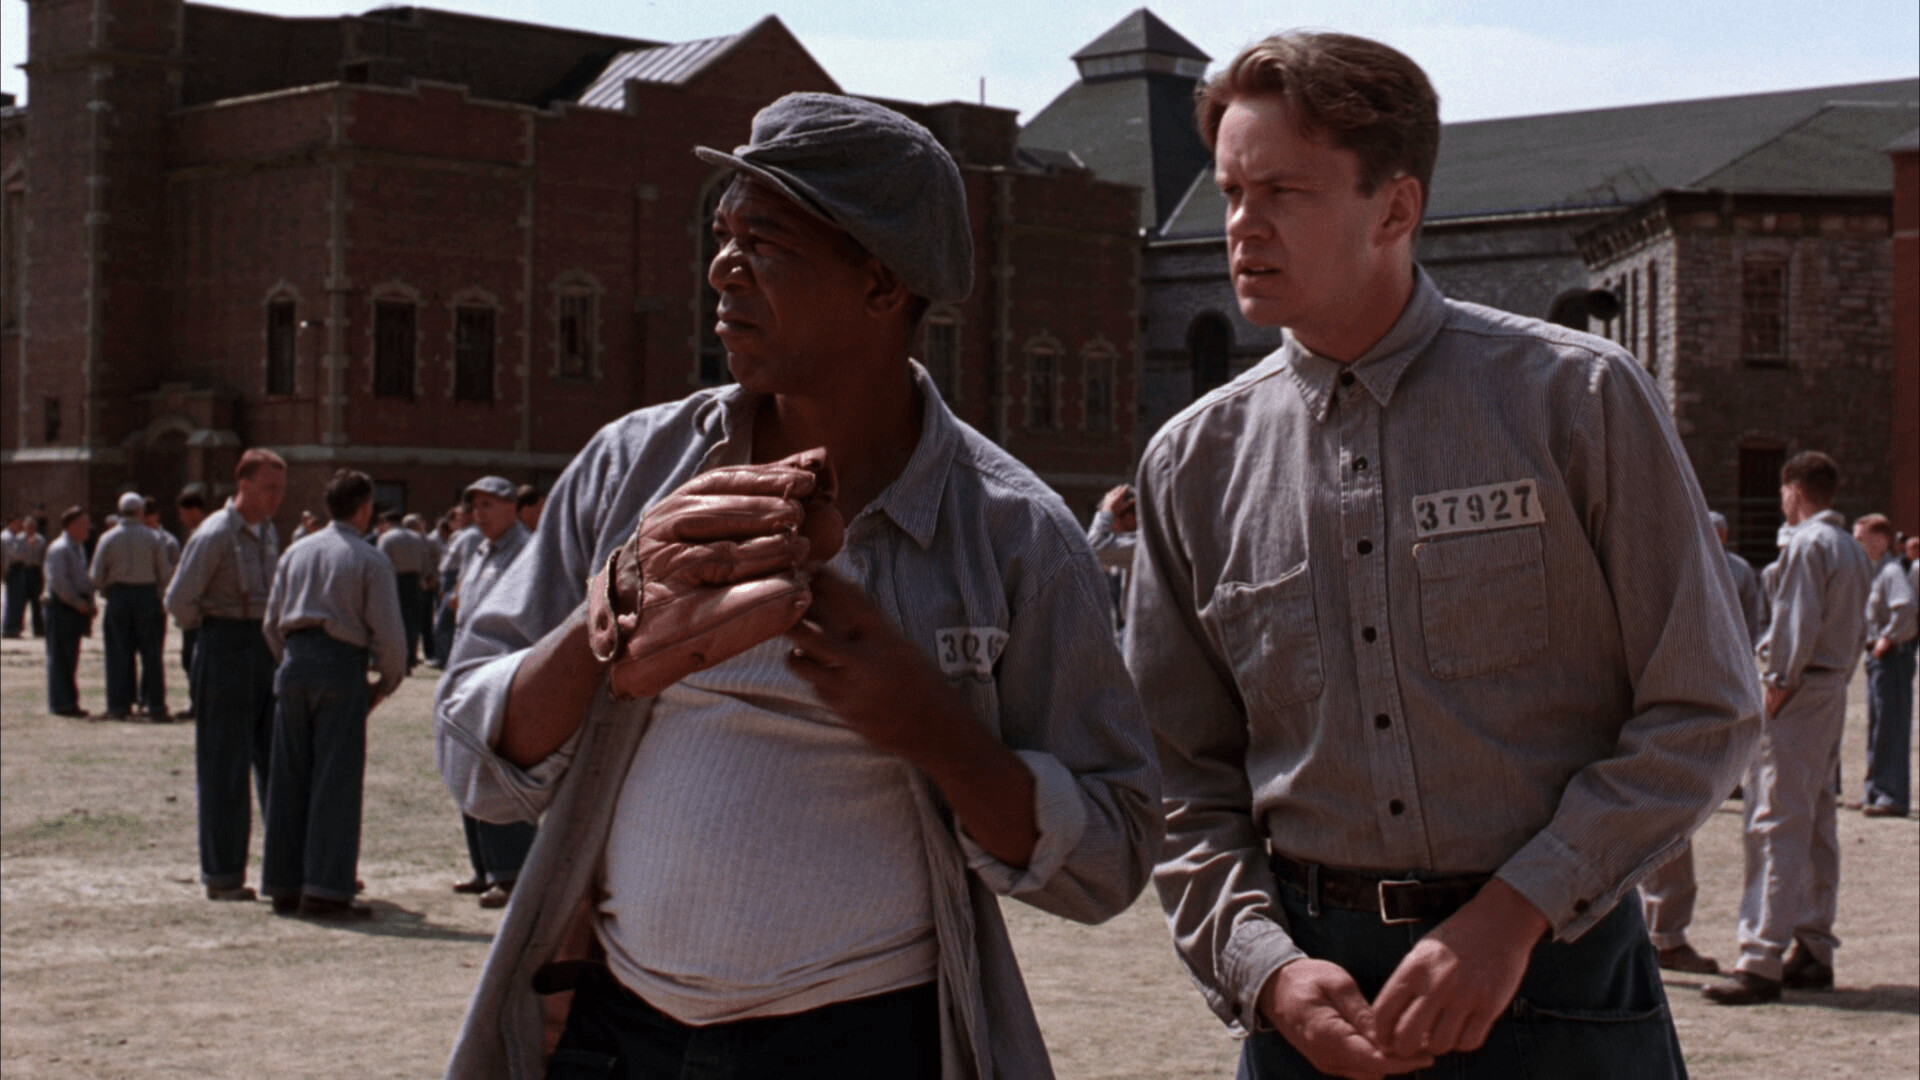 The Shawshank Redemption: Ellis Boyd "Red" Redding, a prison contraband smuggler who befriends Andy Dufresne. 1920x1080 Full HD Wallpaper.